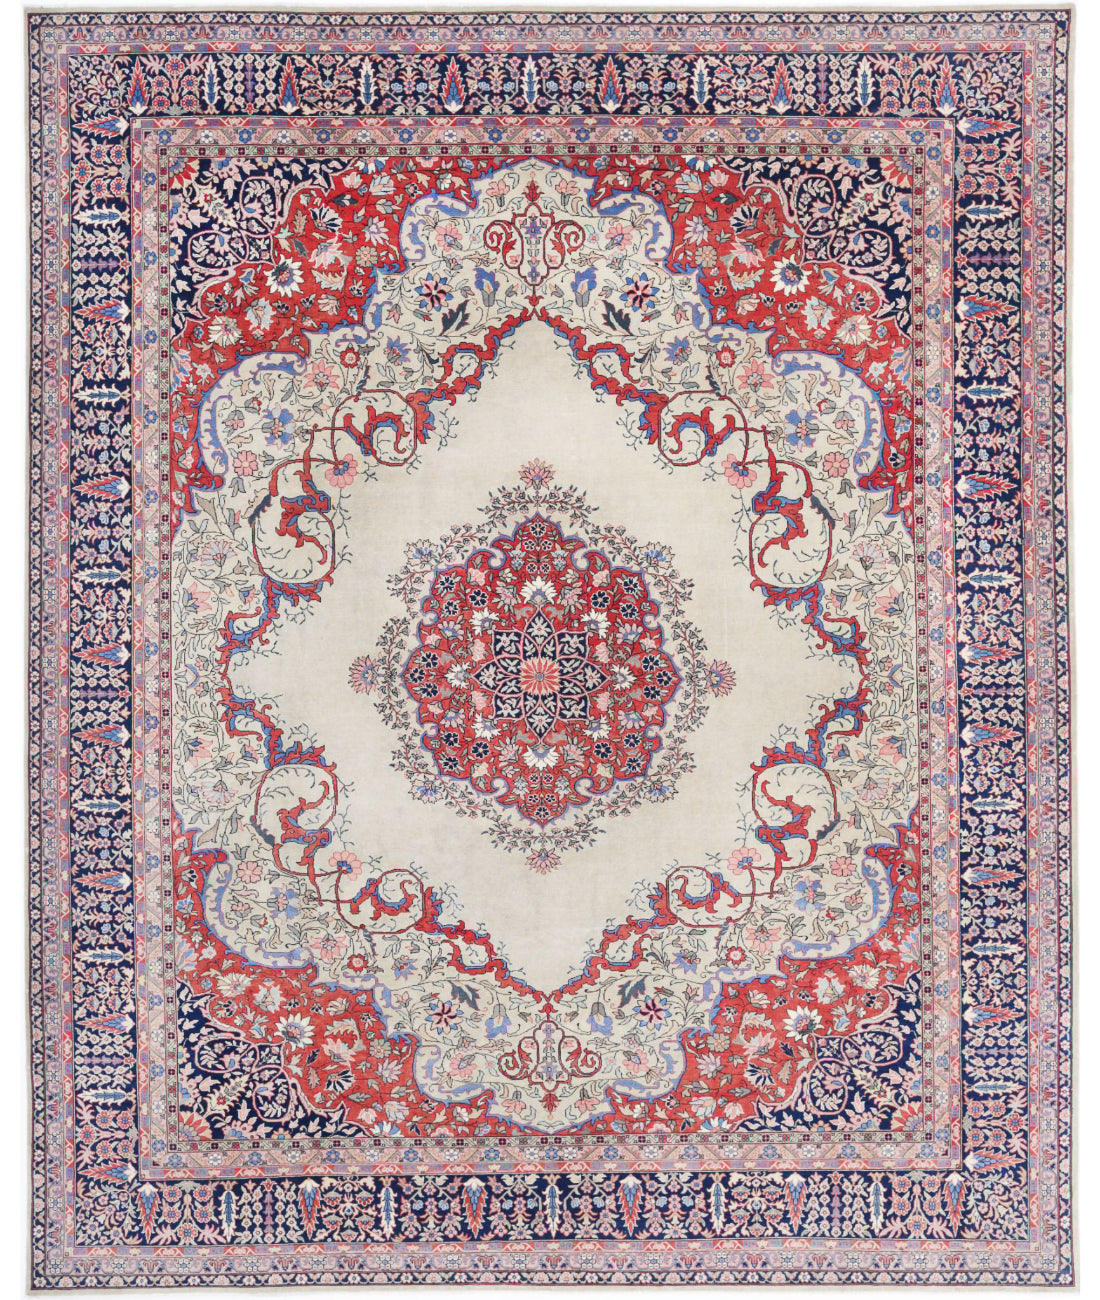 Hand Knotted Antique Persian Tabriz Wool Rug - 11&#39;7&#39;&#39; x 14&#39;5&#39;&#39; 11&#39;7&#39;&#39; x 14&#39;5&#39;&#39; (348 X 433) / Ivory / Blue